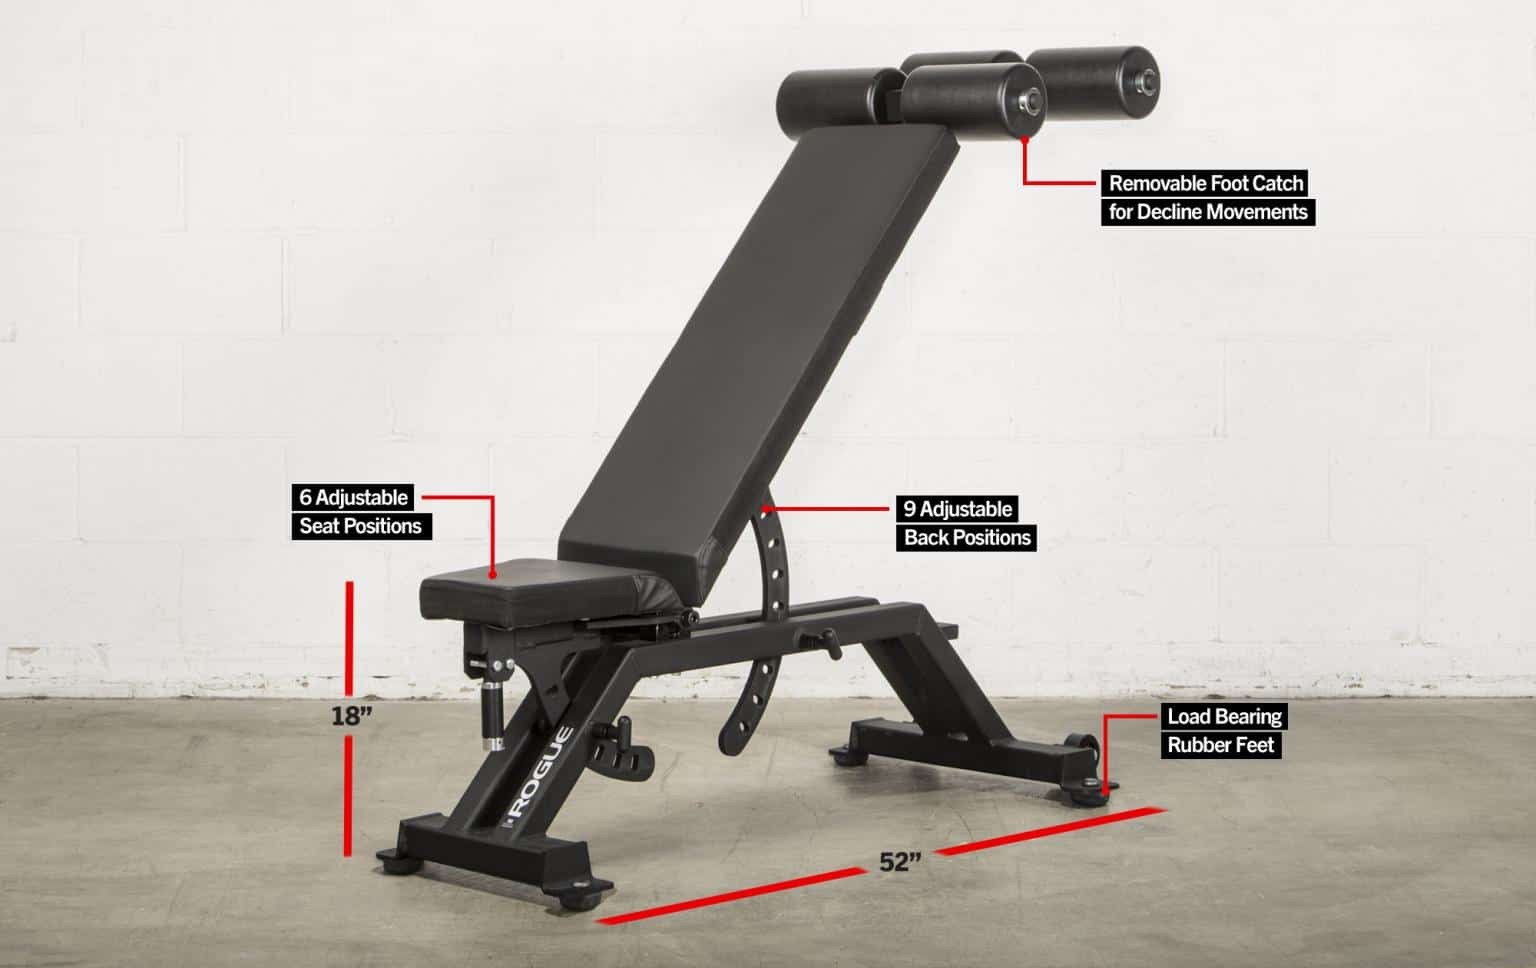 The Rogue AB-3 Adjustable Bench introduces a new decline setting to go along with the 50+ seat and back-rest position combinations from the popular AB-2. Ideally suited for dynamic training or for gyms serving multiple athletes, this compact, 11-gauge steel weight bench offers a rare combination of sturdiness and maneuverability, with boundless customization options.